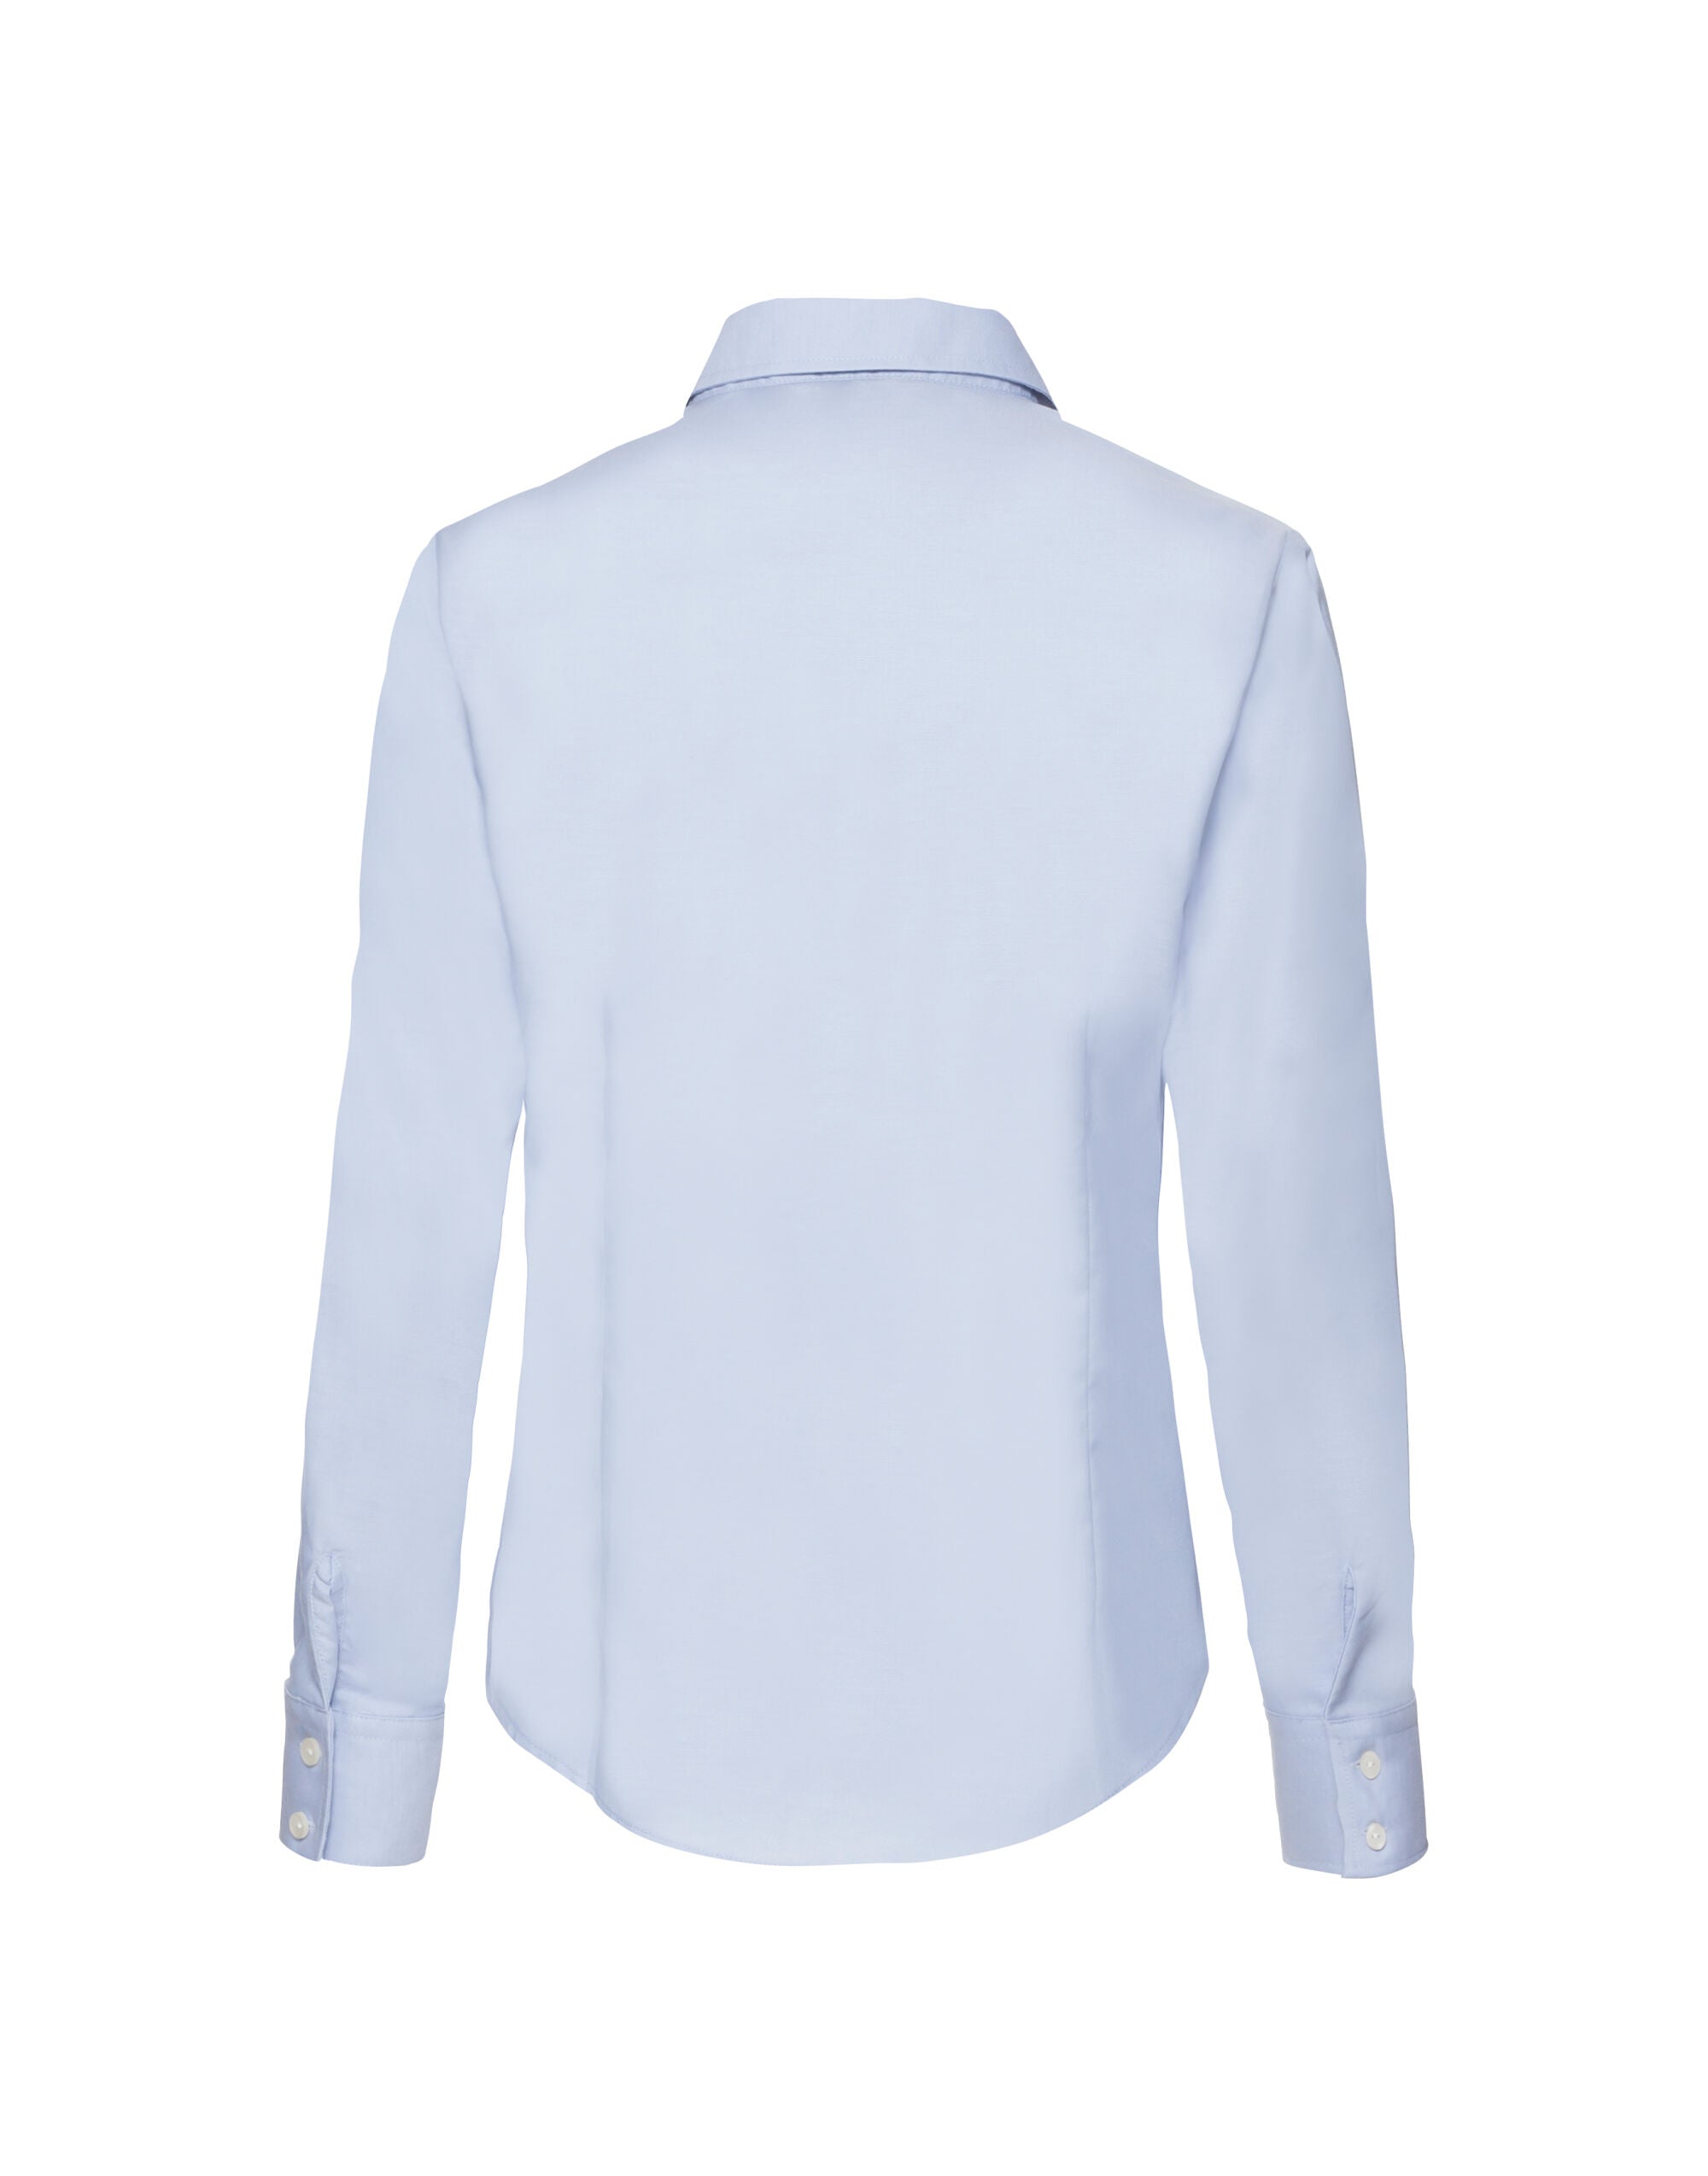 Fruit Of The Loom Ladies' Long Sleeve Oxford Shirt Easy-care fabric (65114L)